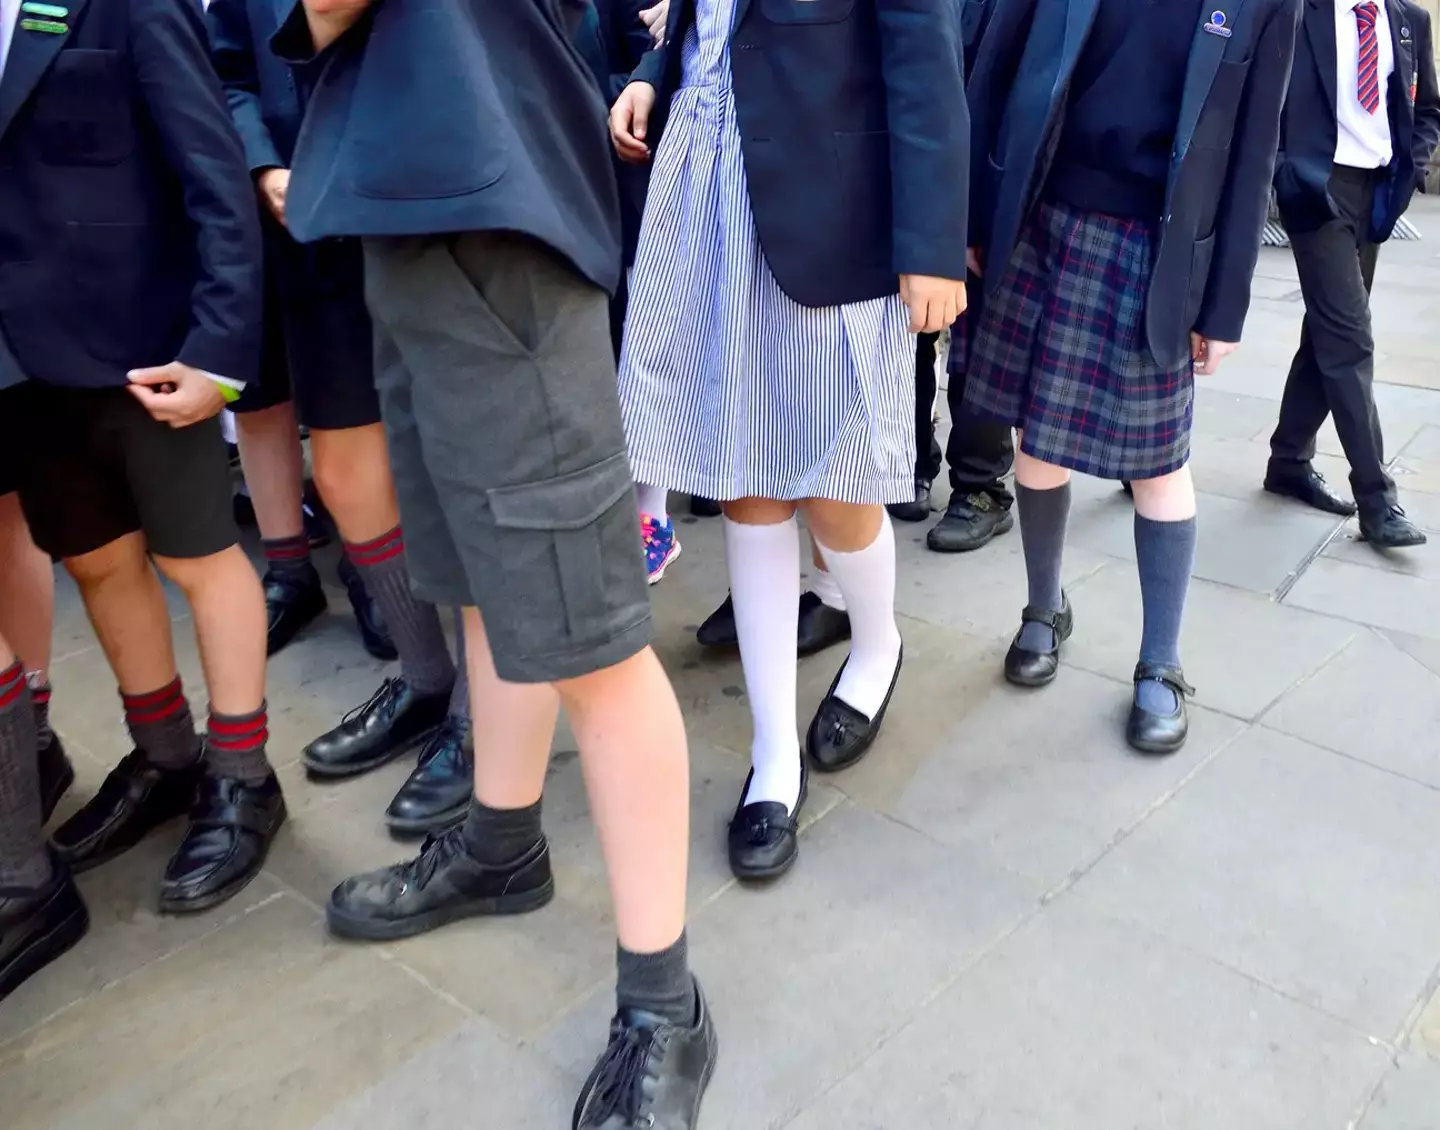 Parents across the UK are struggling with uniform costs amid the cost-of-living crisis.